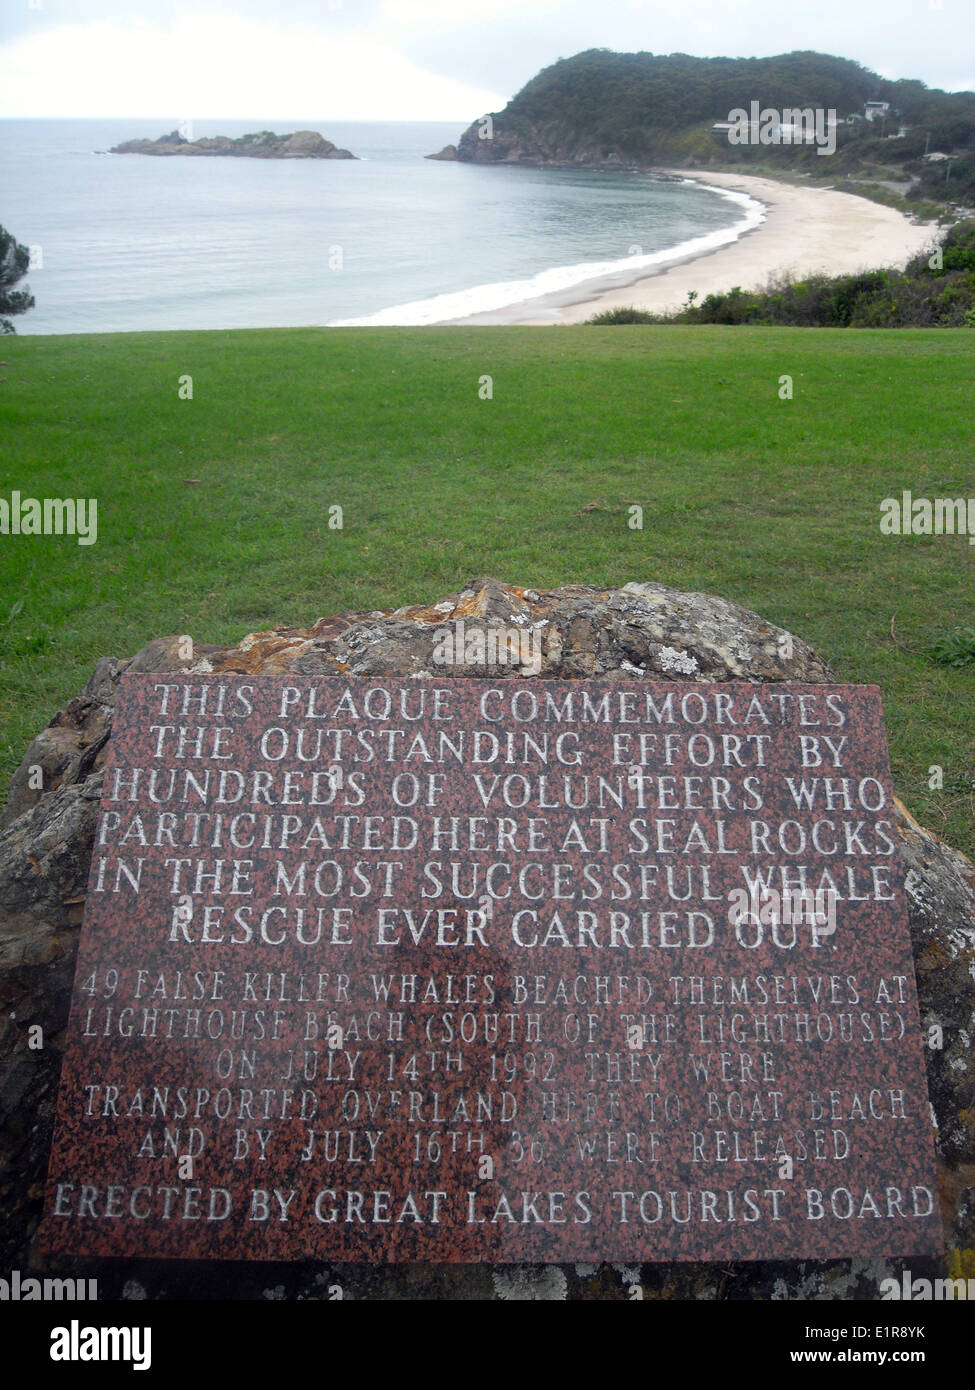 Plaque commemorating successful whale rescue, Seal Rocks, Myall Lakes National Park, NSW, Australia Stock Photo